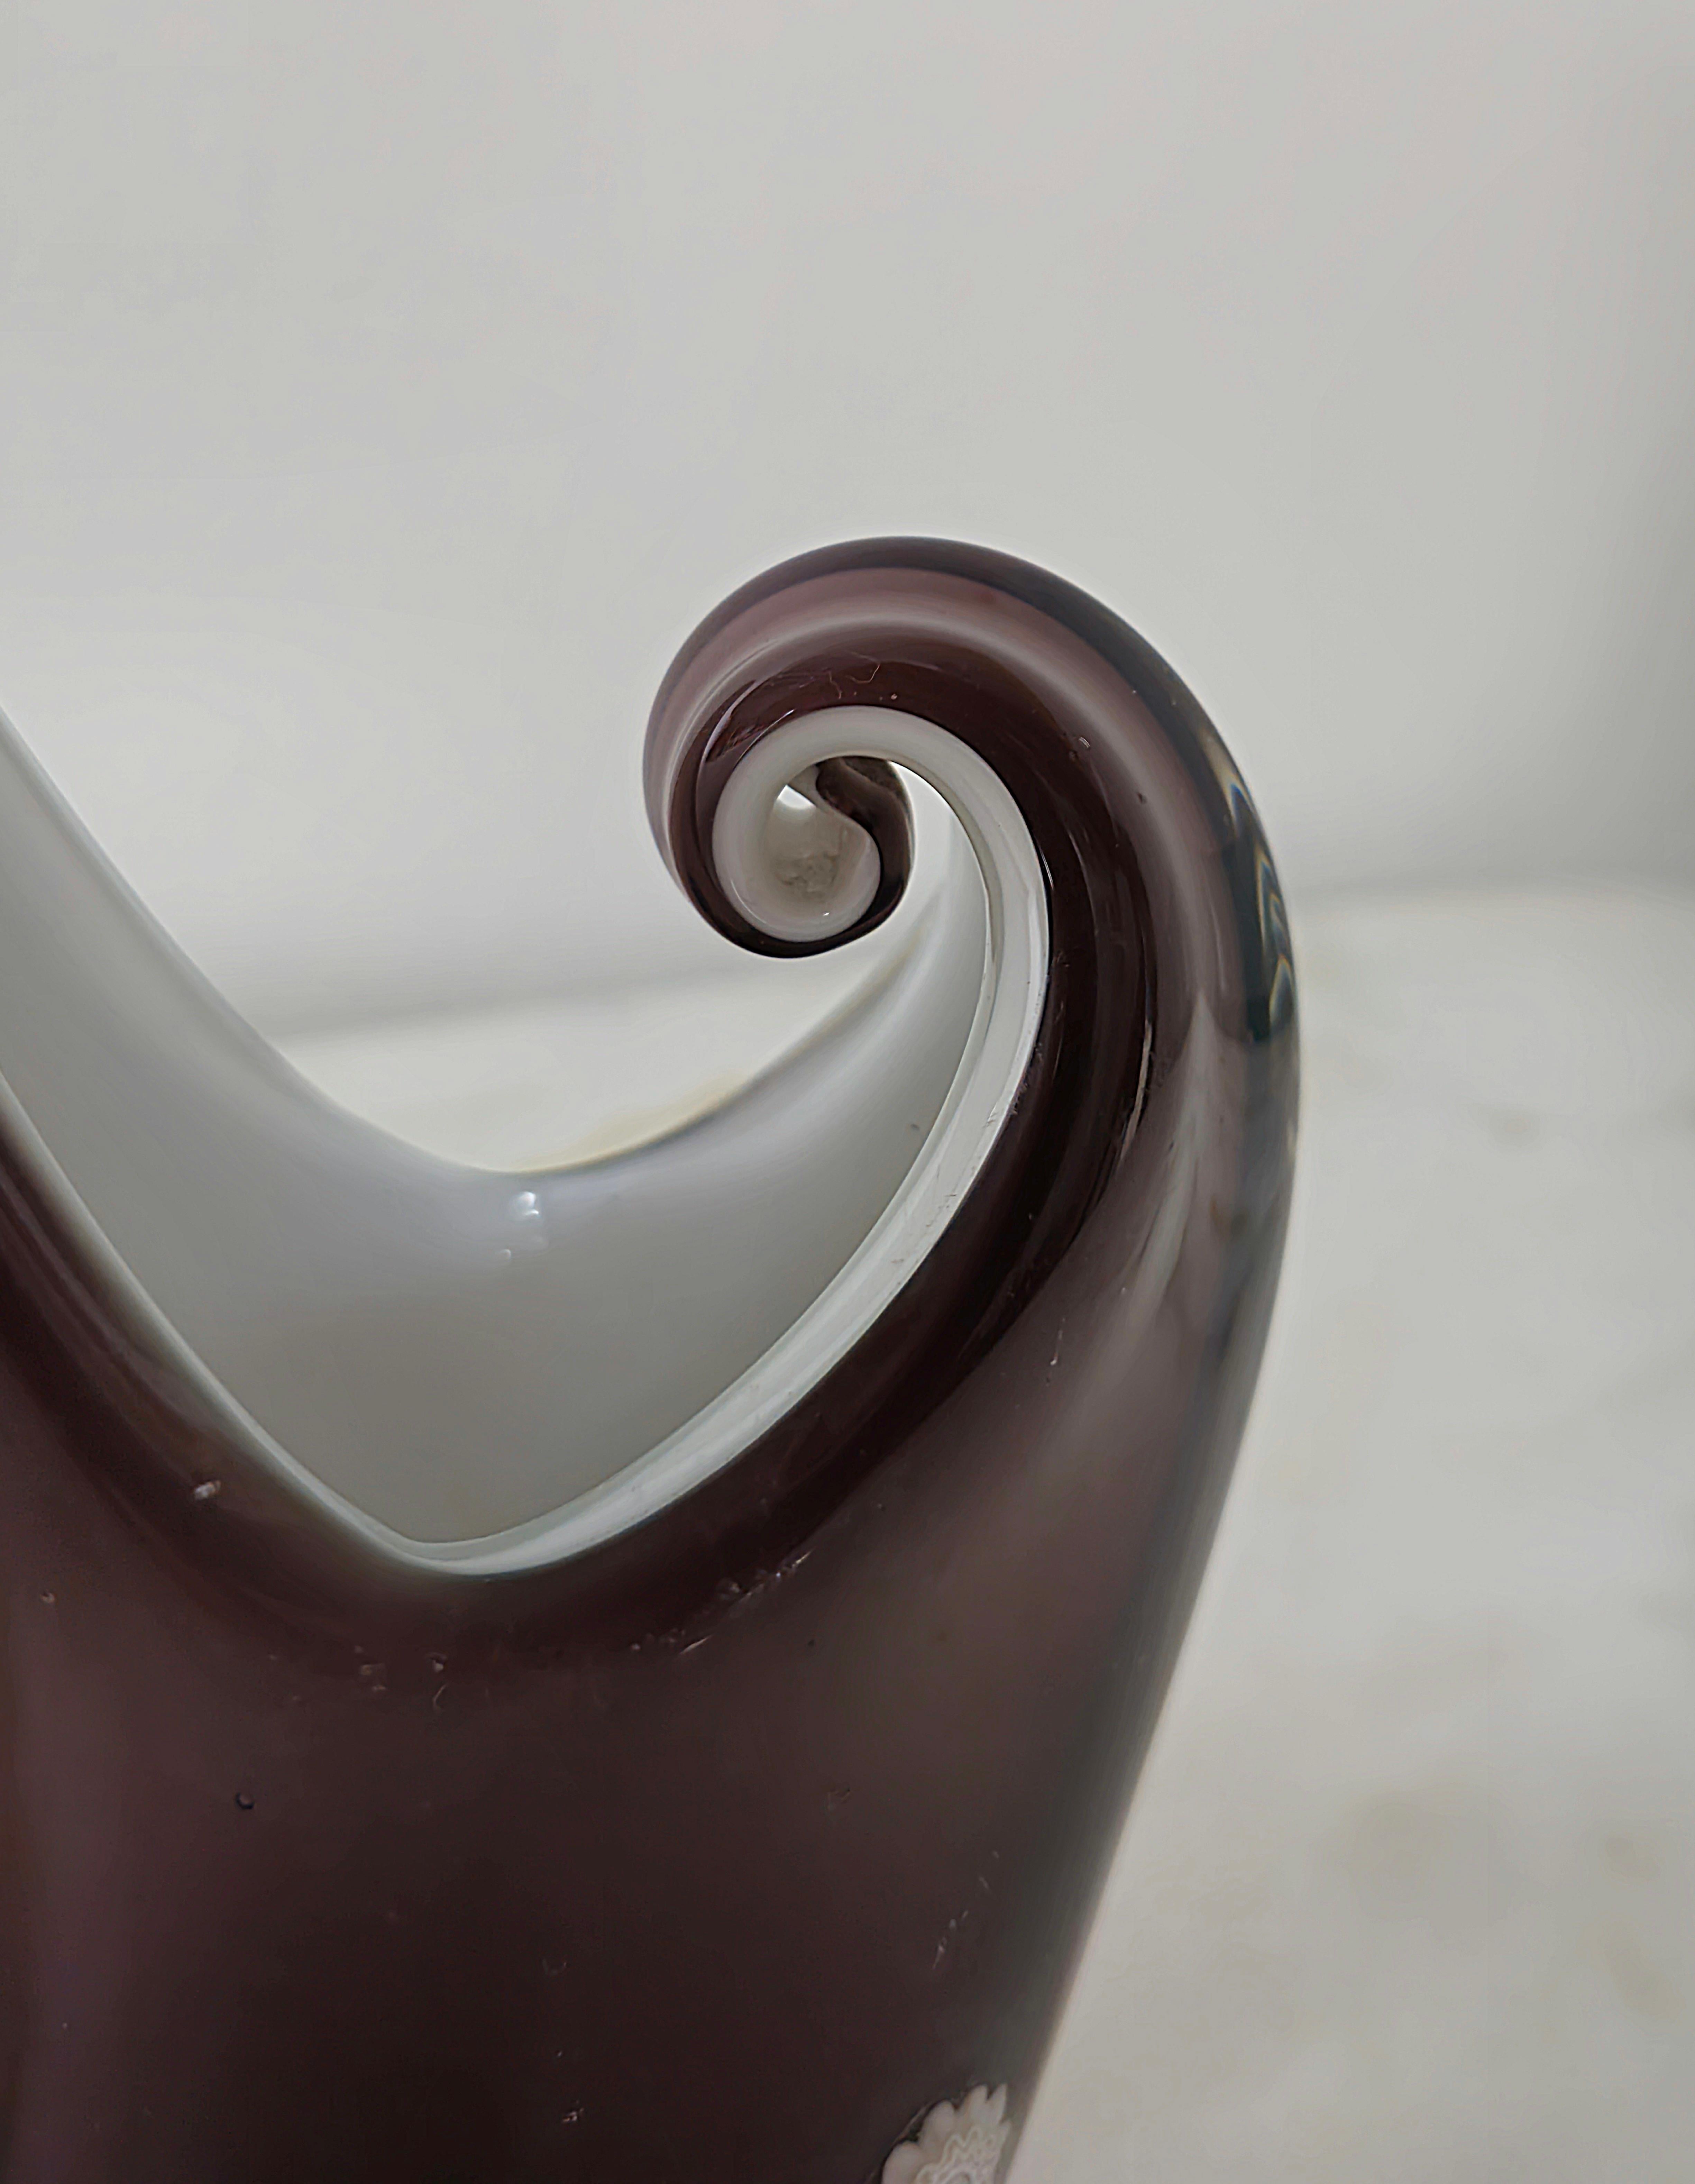 Vase/decorative object produced in Italy in the 1970s and attributed to the renowned Murano company La Murrina.
The vase with particular shapes was made of Murano glass in shades of aubergine, while inside in shades of milky white. Murrine